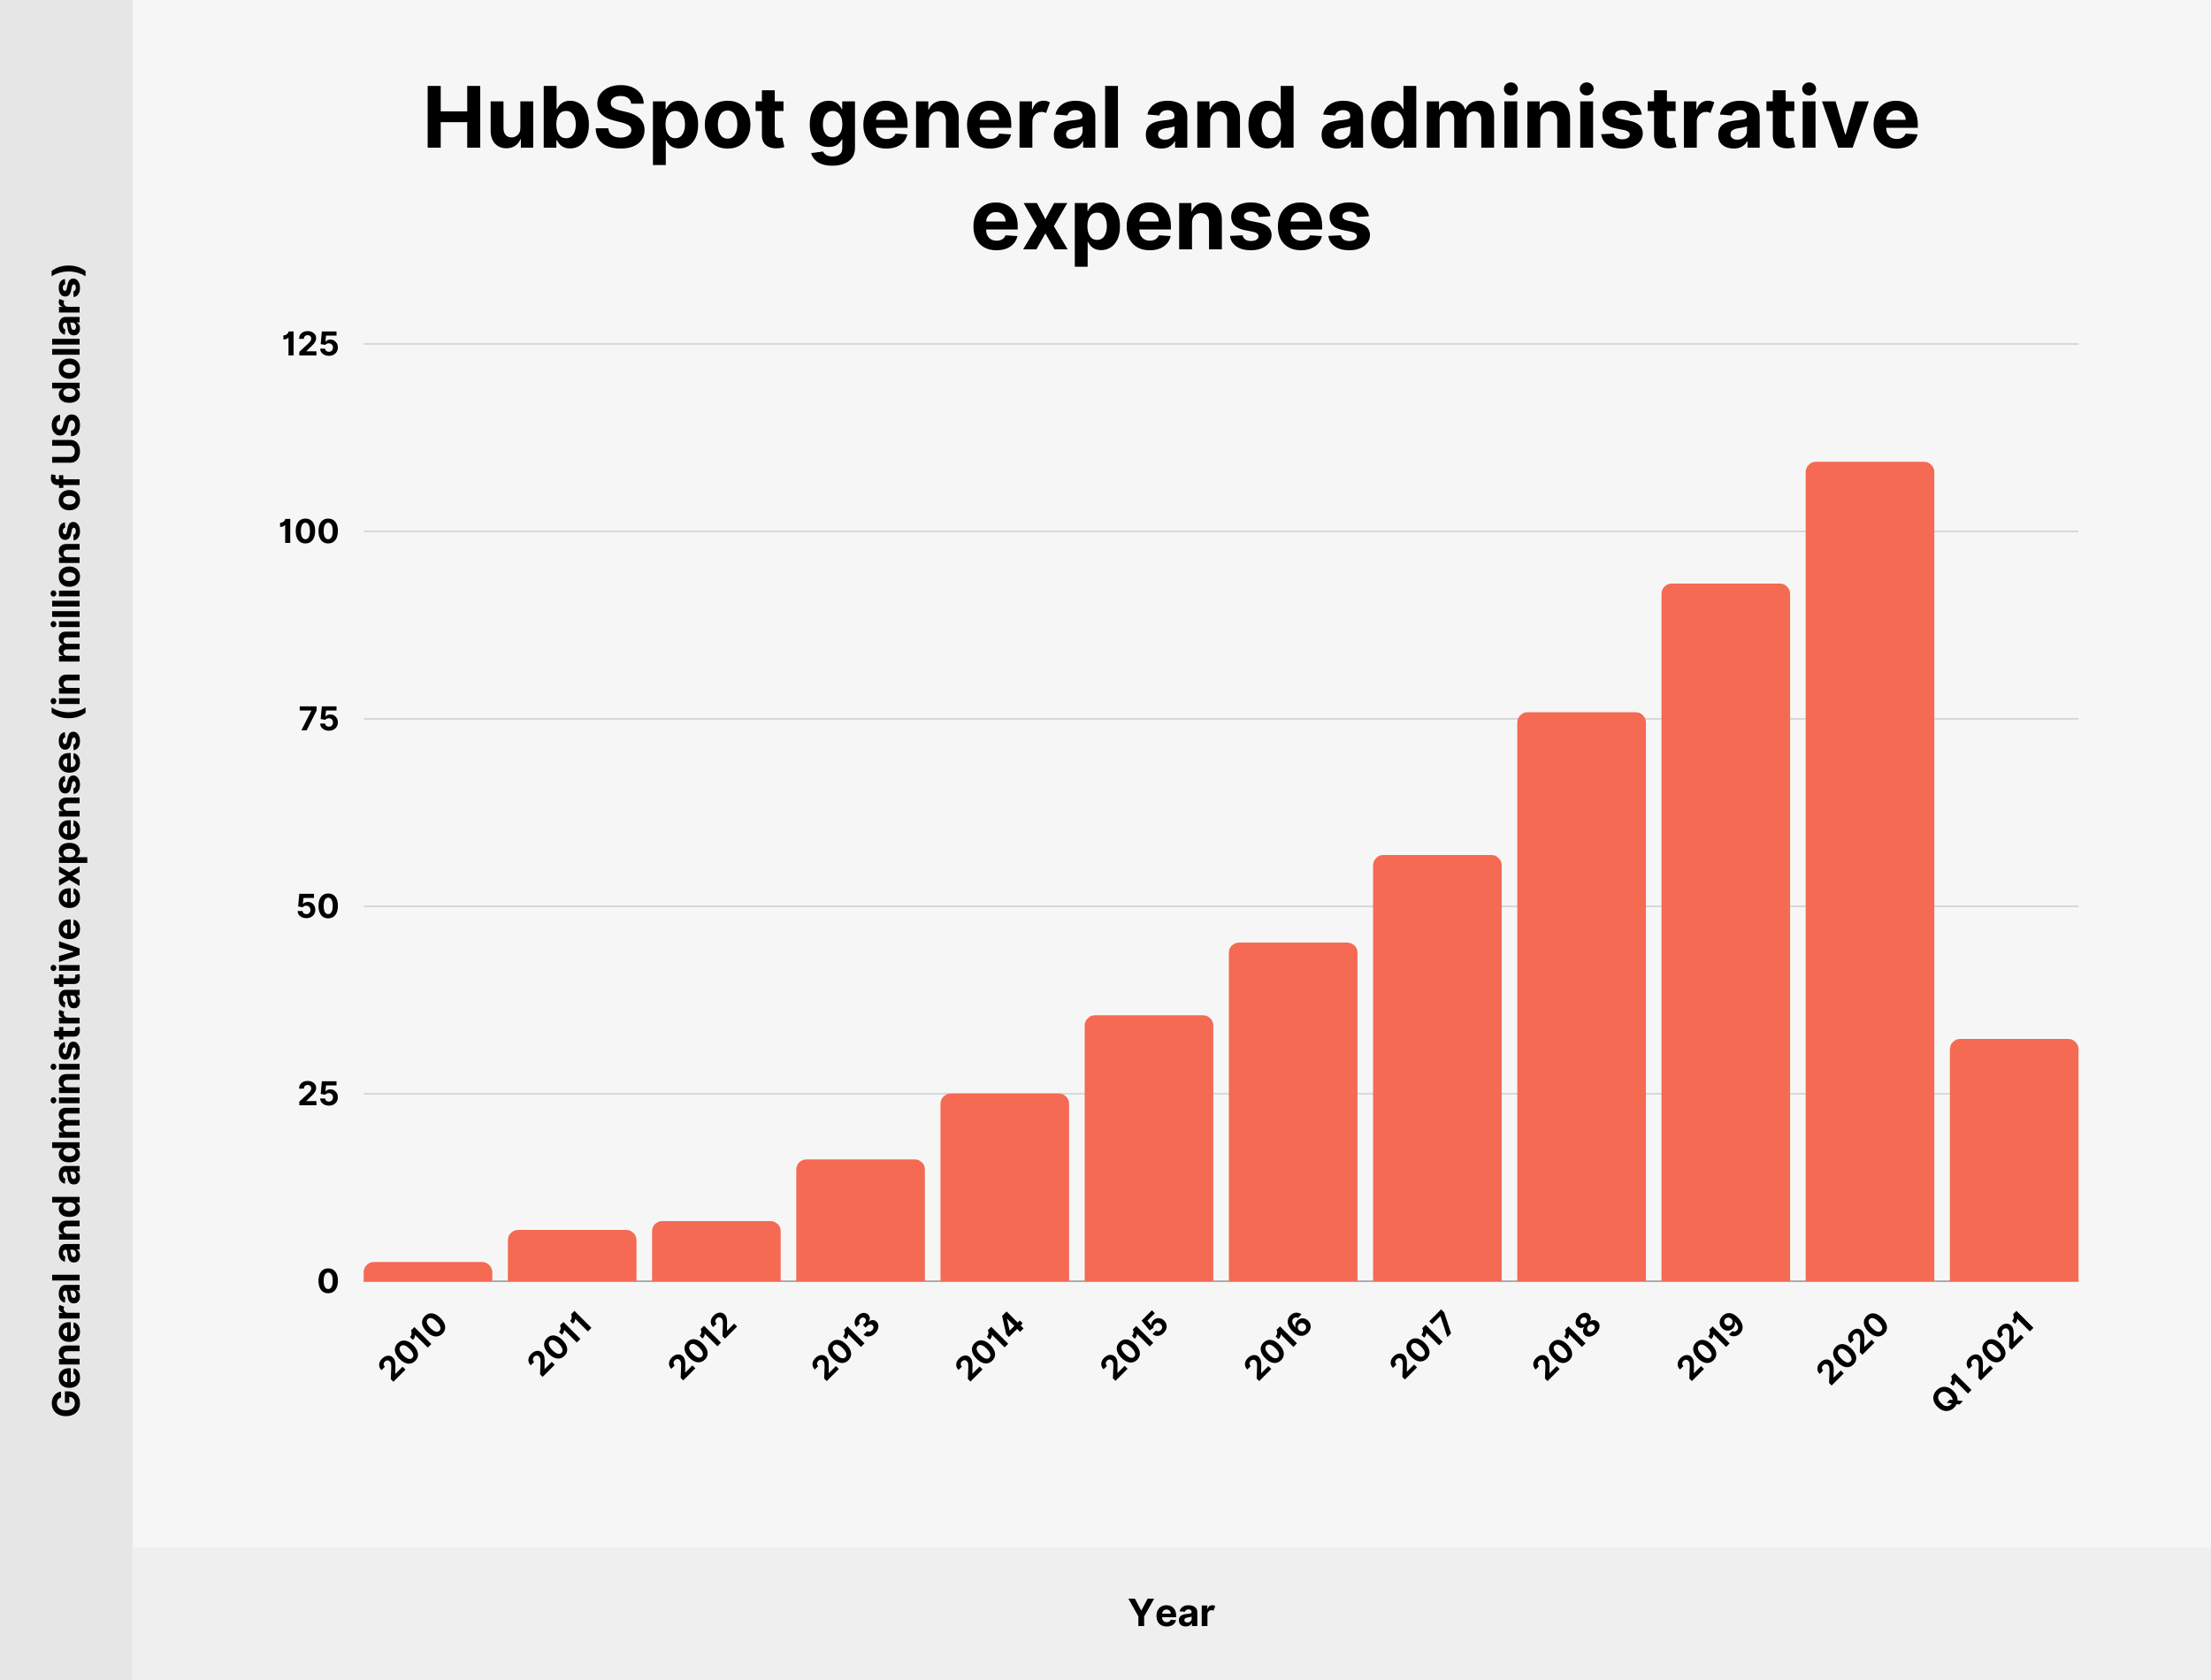 HubSpot general and administrative expenses